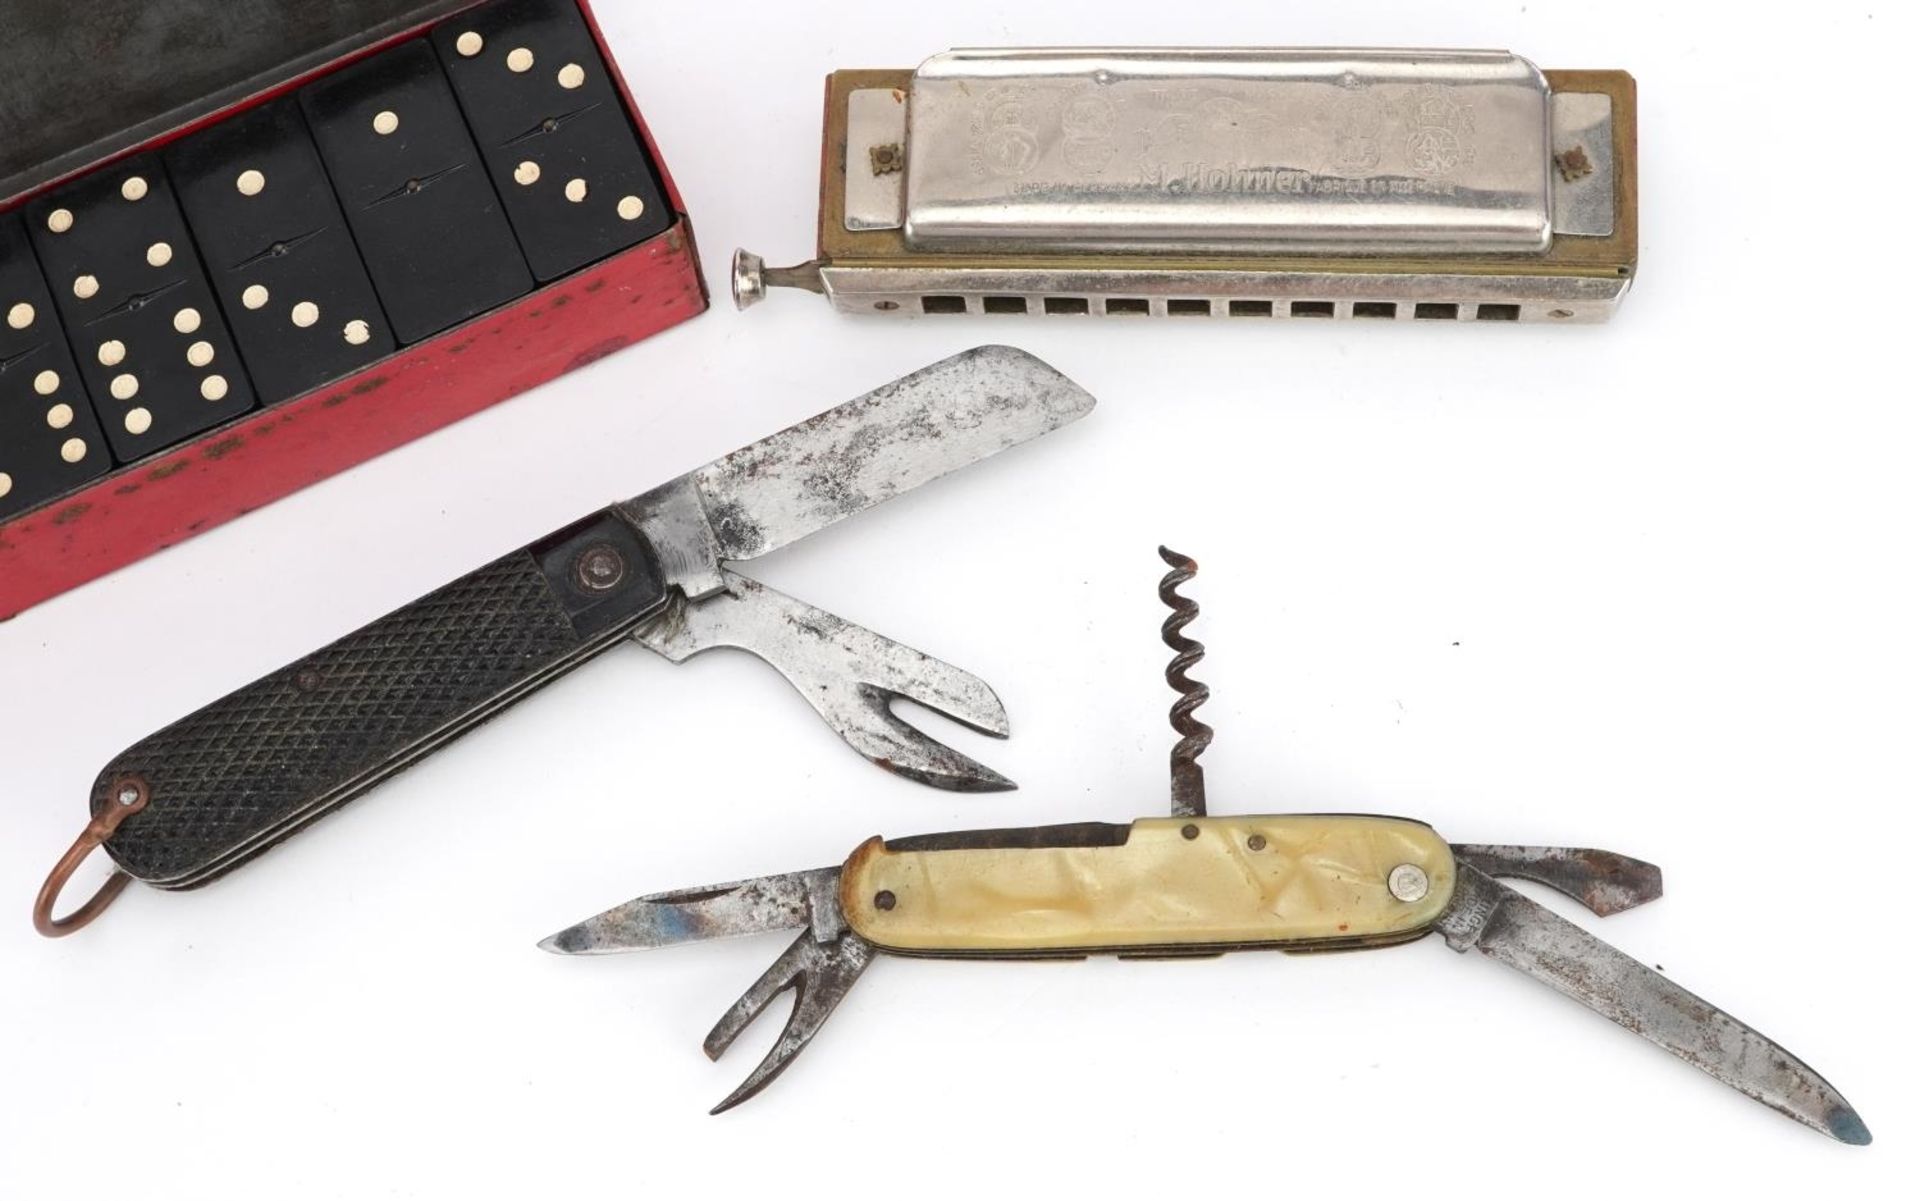 Sundry items including a folding pocket knife, M Hohner harmonica and Star Cigarettes advertising - Image 4 of 6